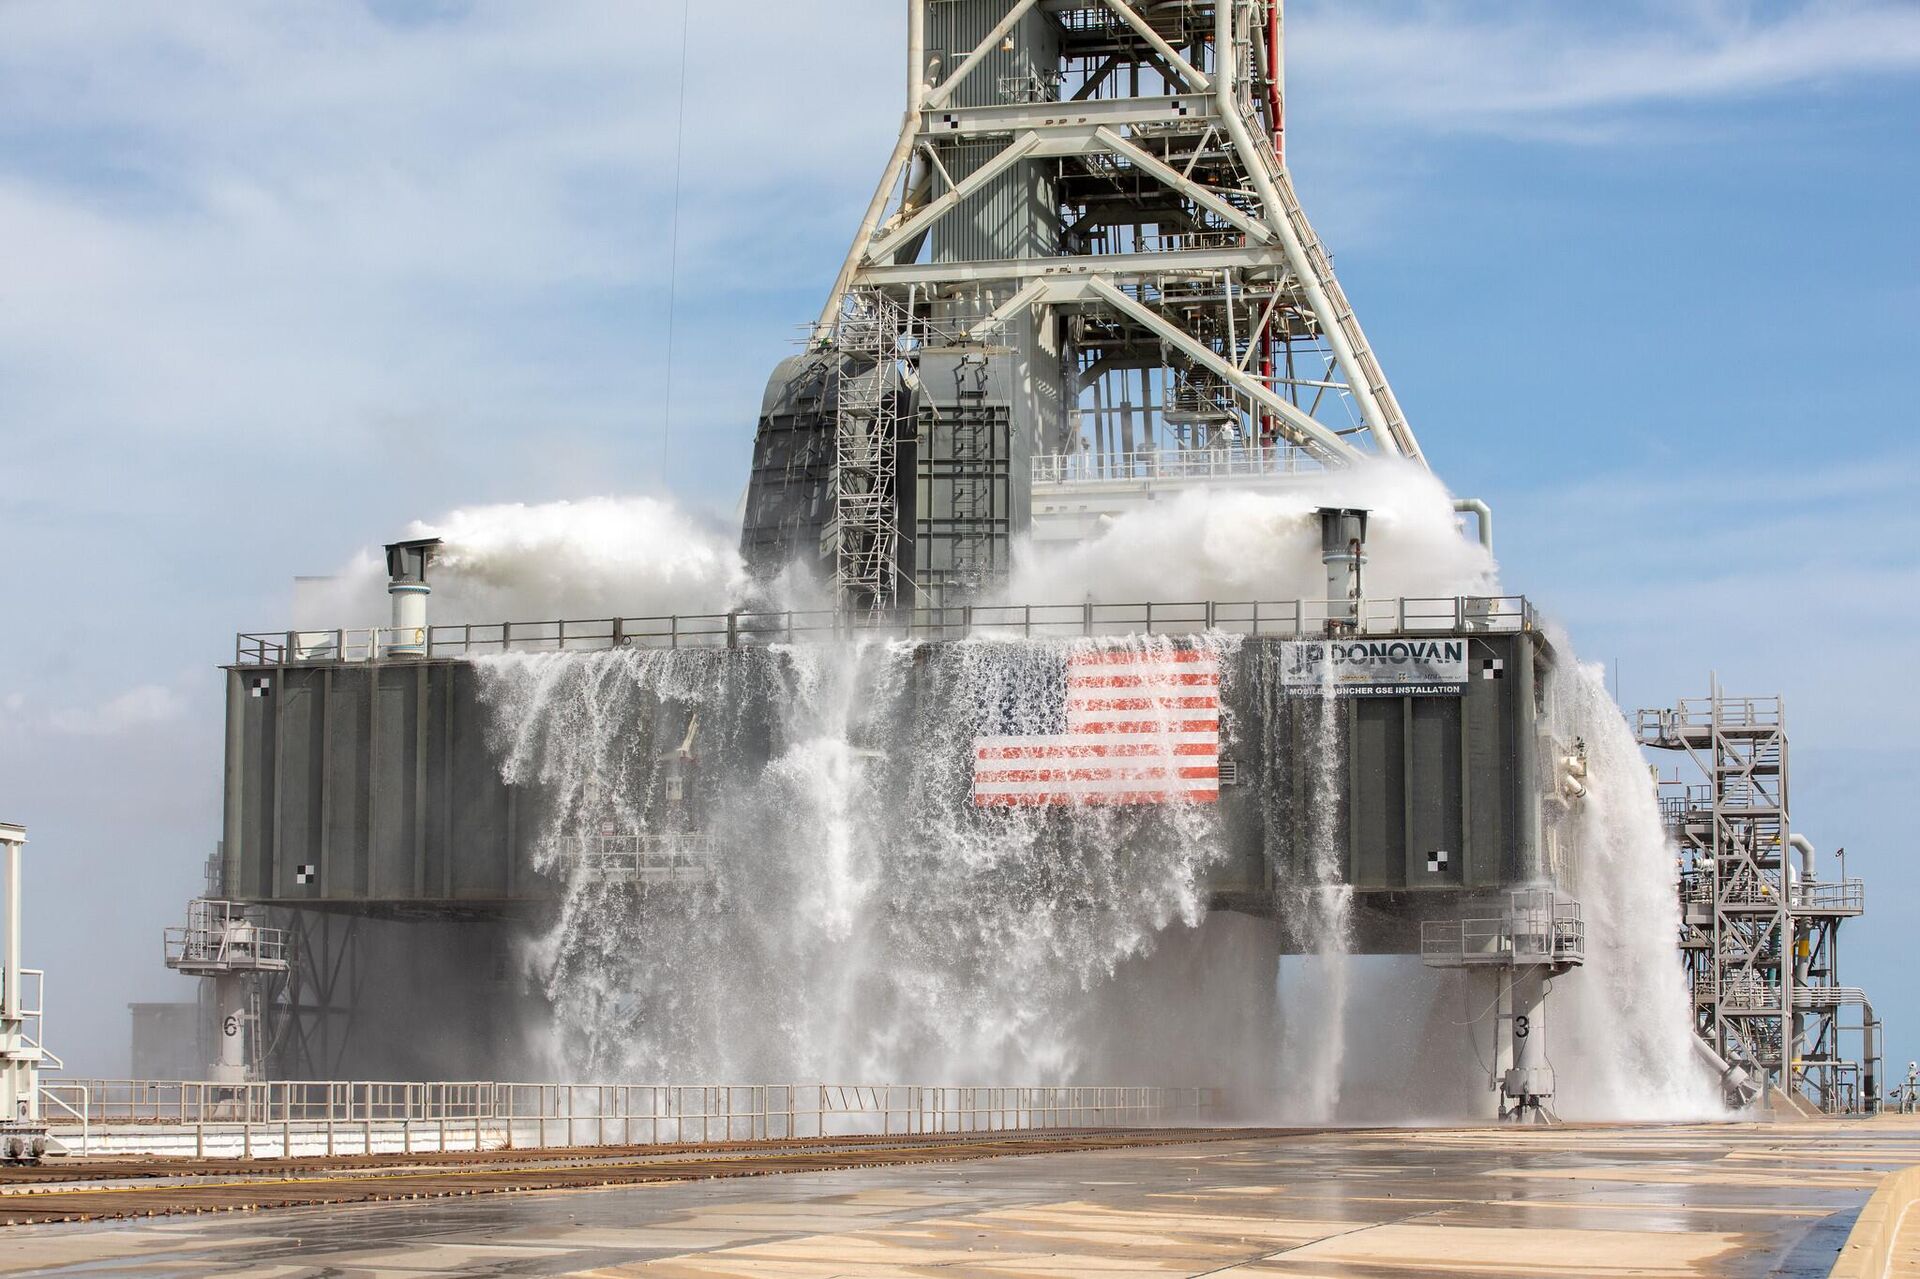 About 450,000 gallons of water poured onto the Pad B flame deflector, the mobile launcher flame hole and onto the launcher’s blast deck during NASA's water flow test on September 13, 2019.  - Sputnik International, 1920, 02.04.2022